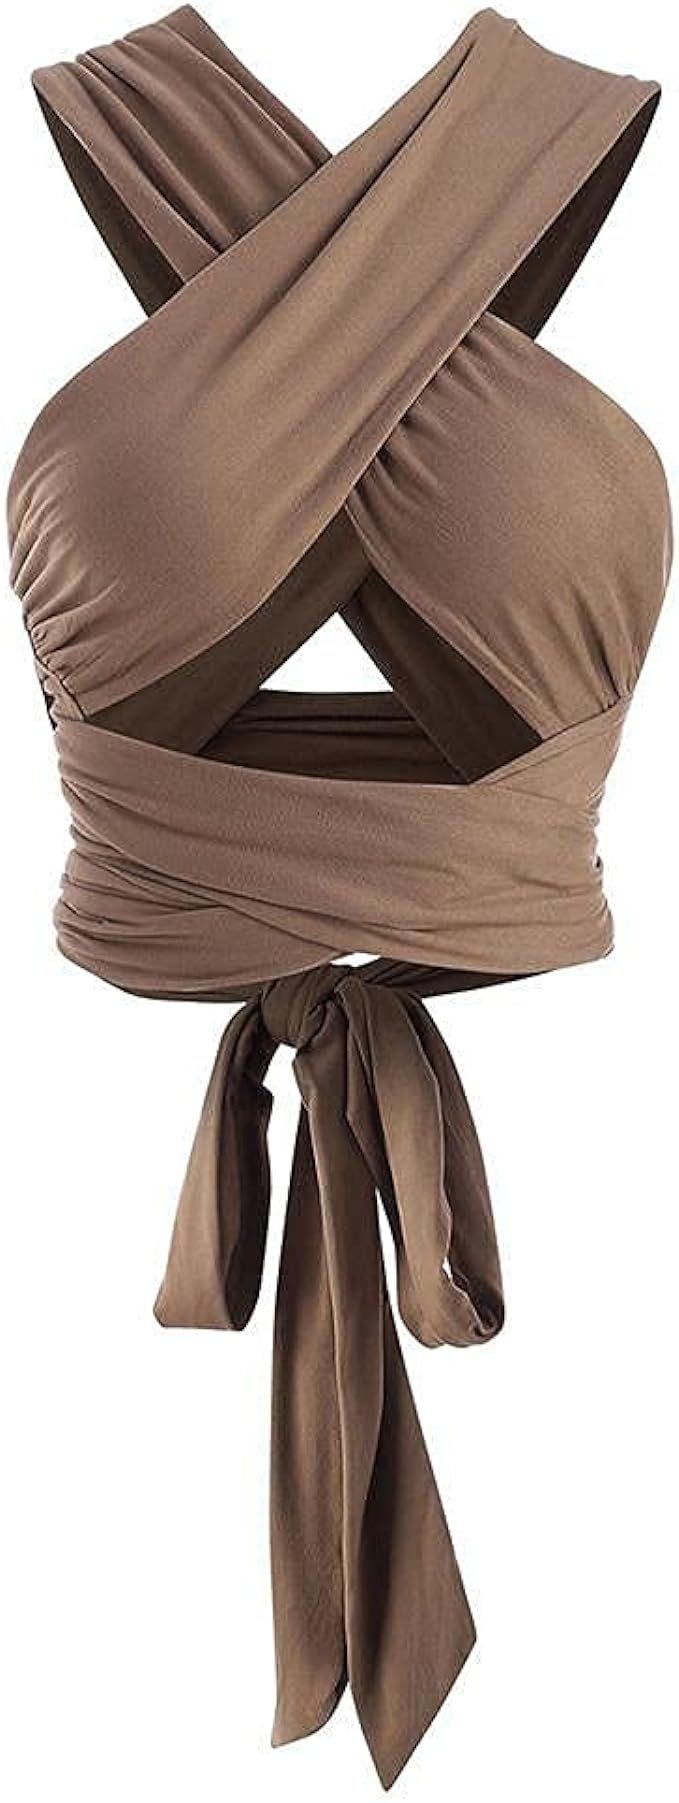 ZAFUL Women's Crop Top Ribbed Halter Criss Cross Ruched Lace-up Cami Bandana Top Cropped Tank Top | Amazon (US)